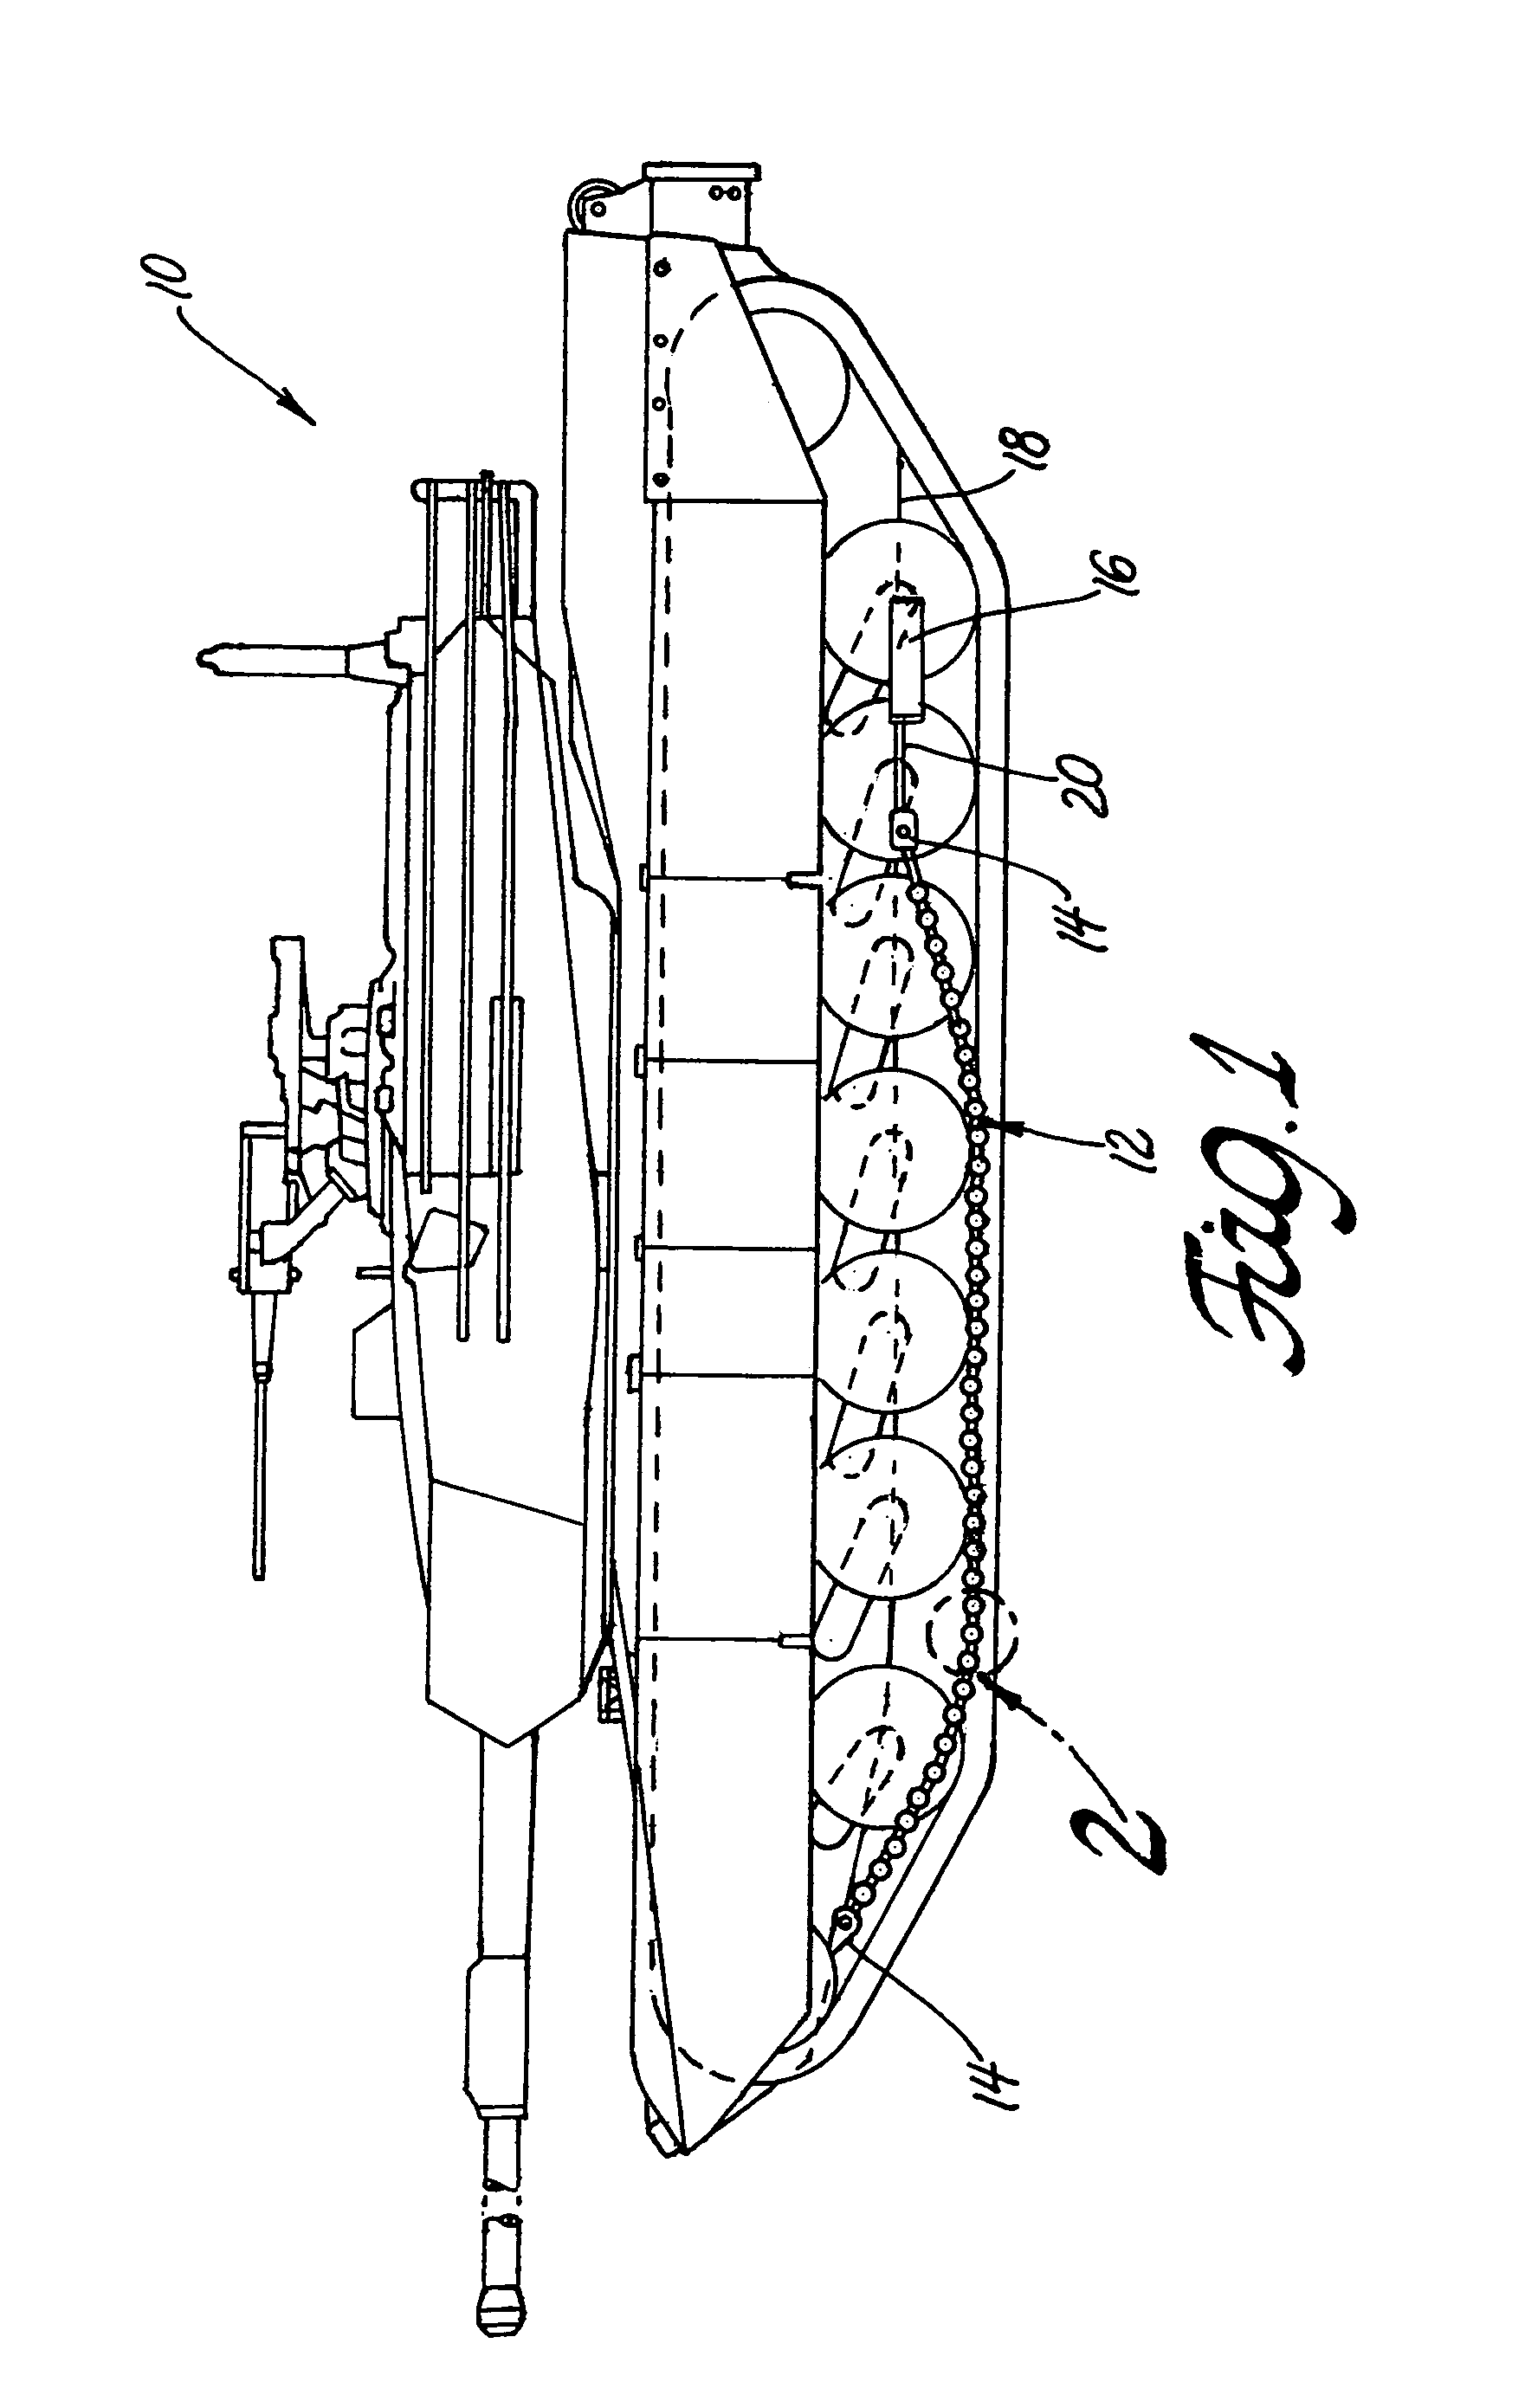 Apparatus and method for ballistic protection of vehicle undercarriages